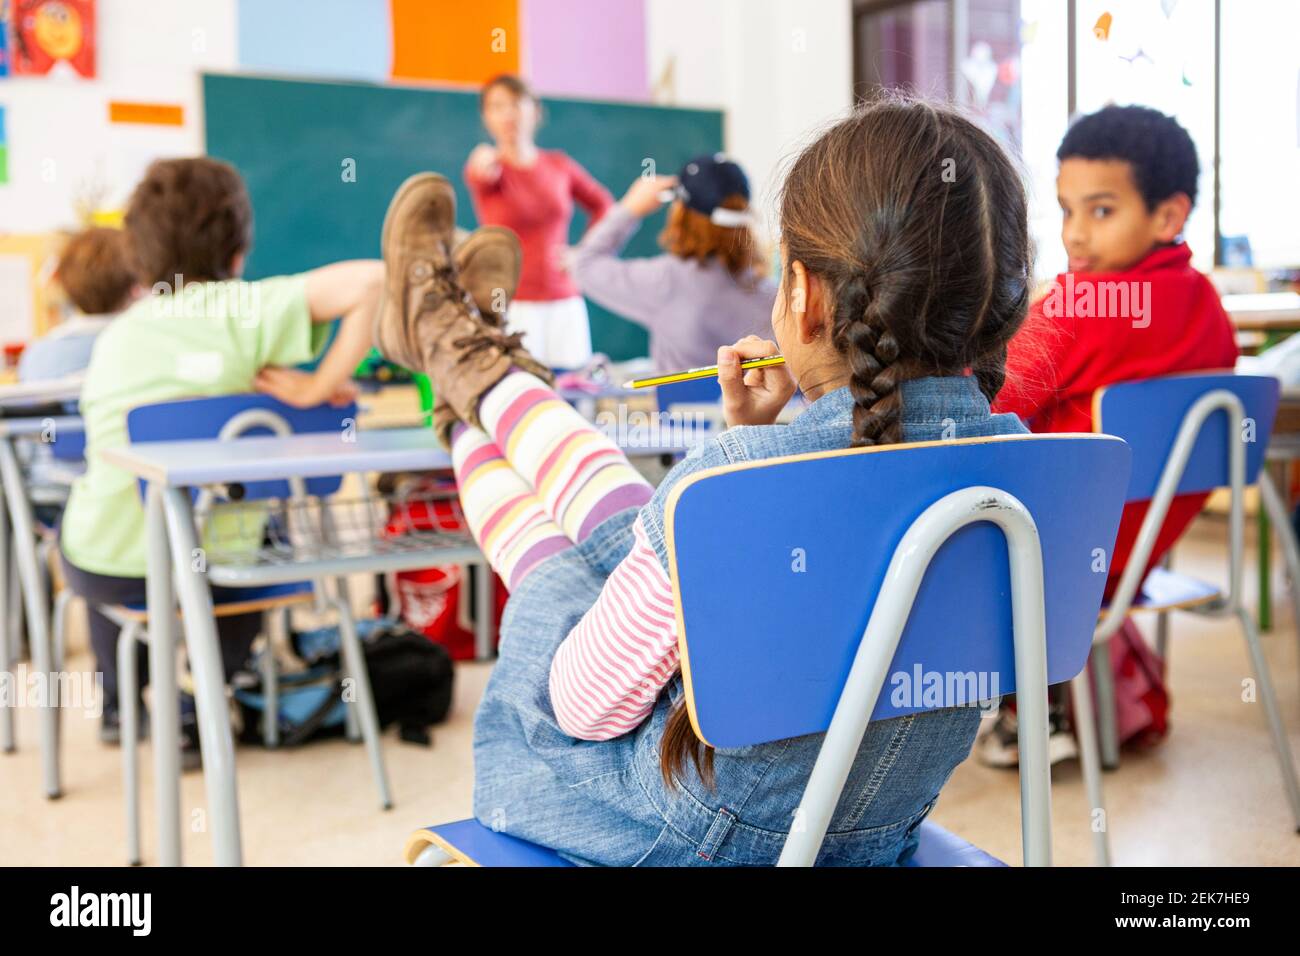 Young girl with a feet up on a desk in a school classroom Stock Photo